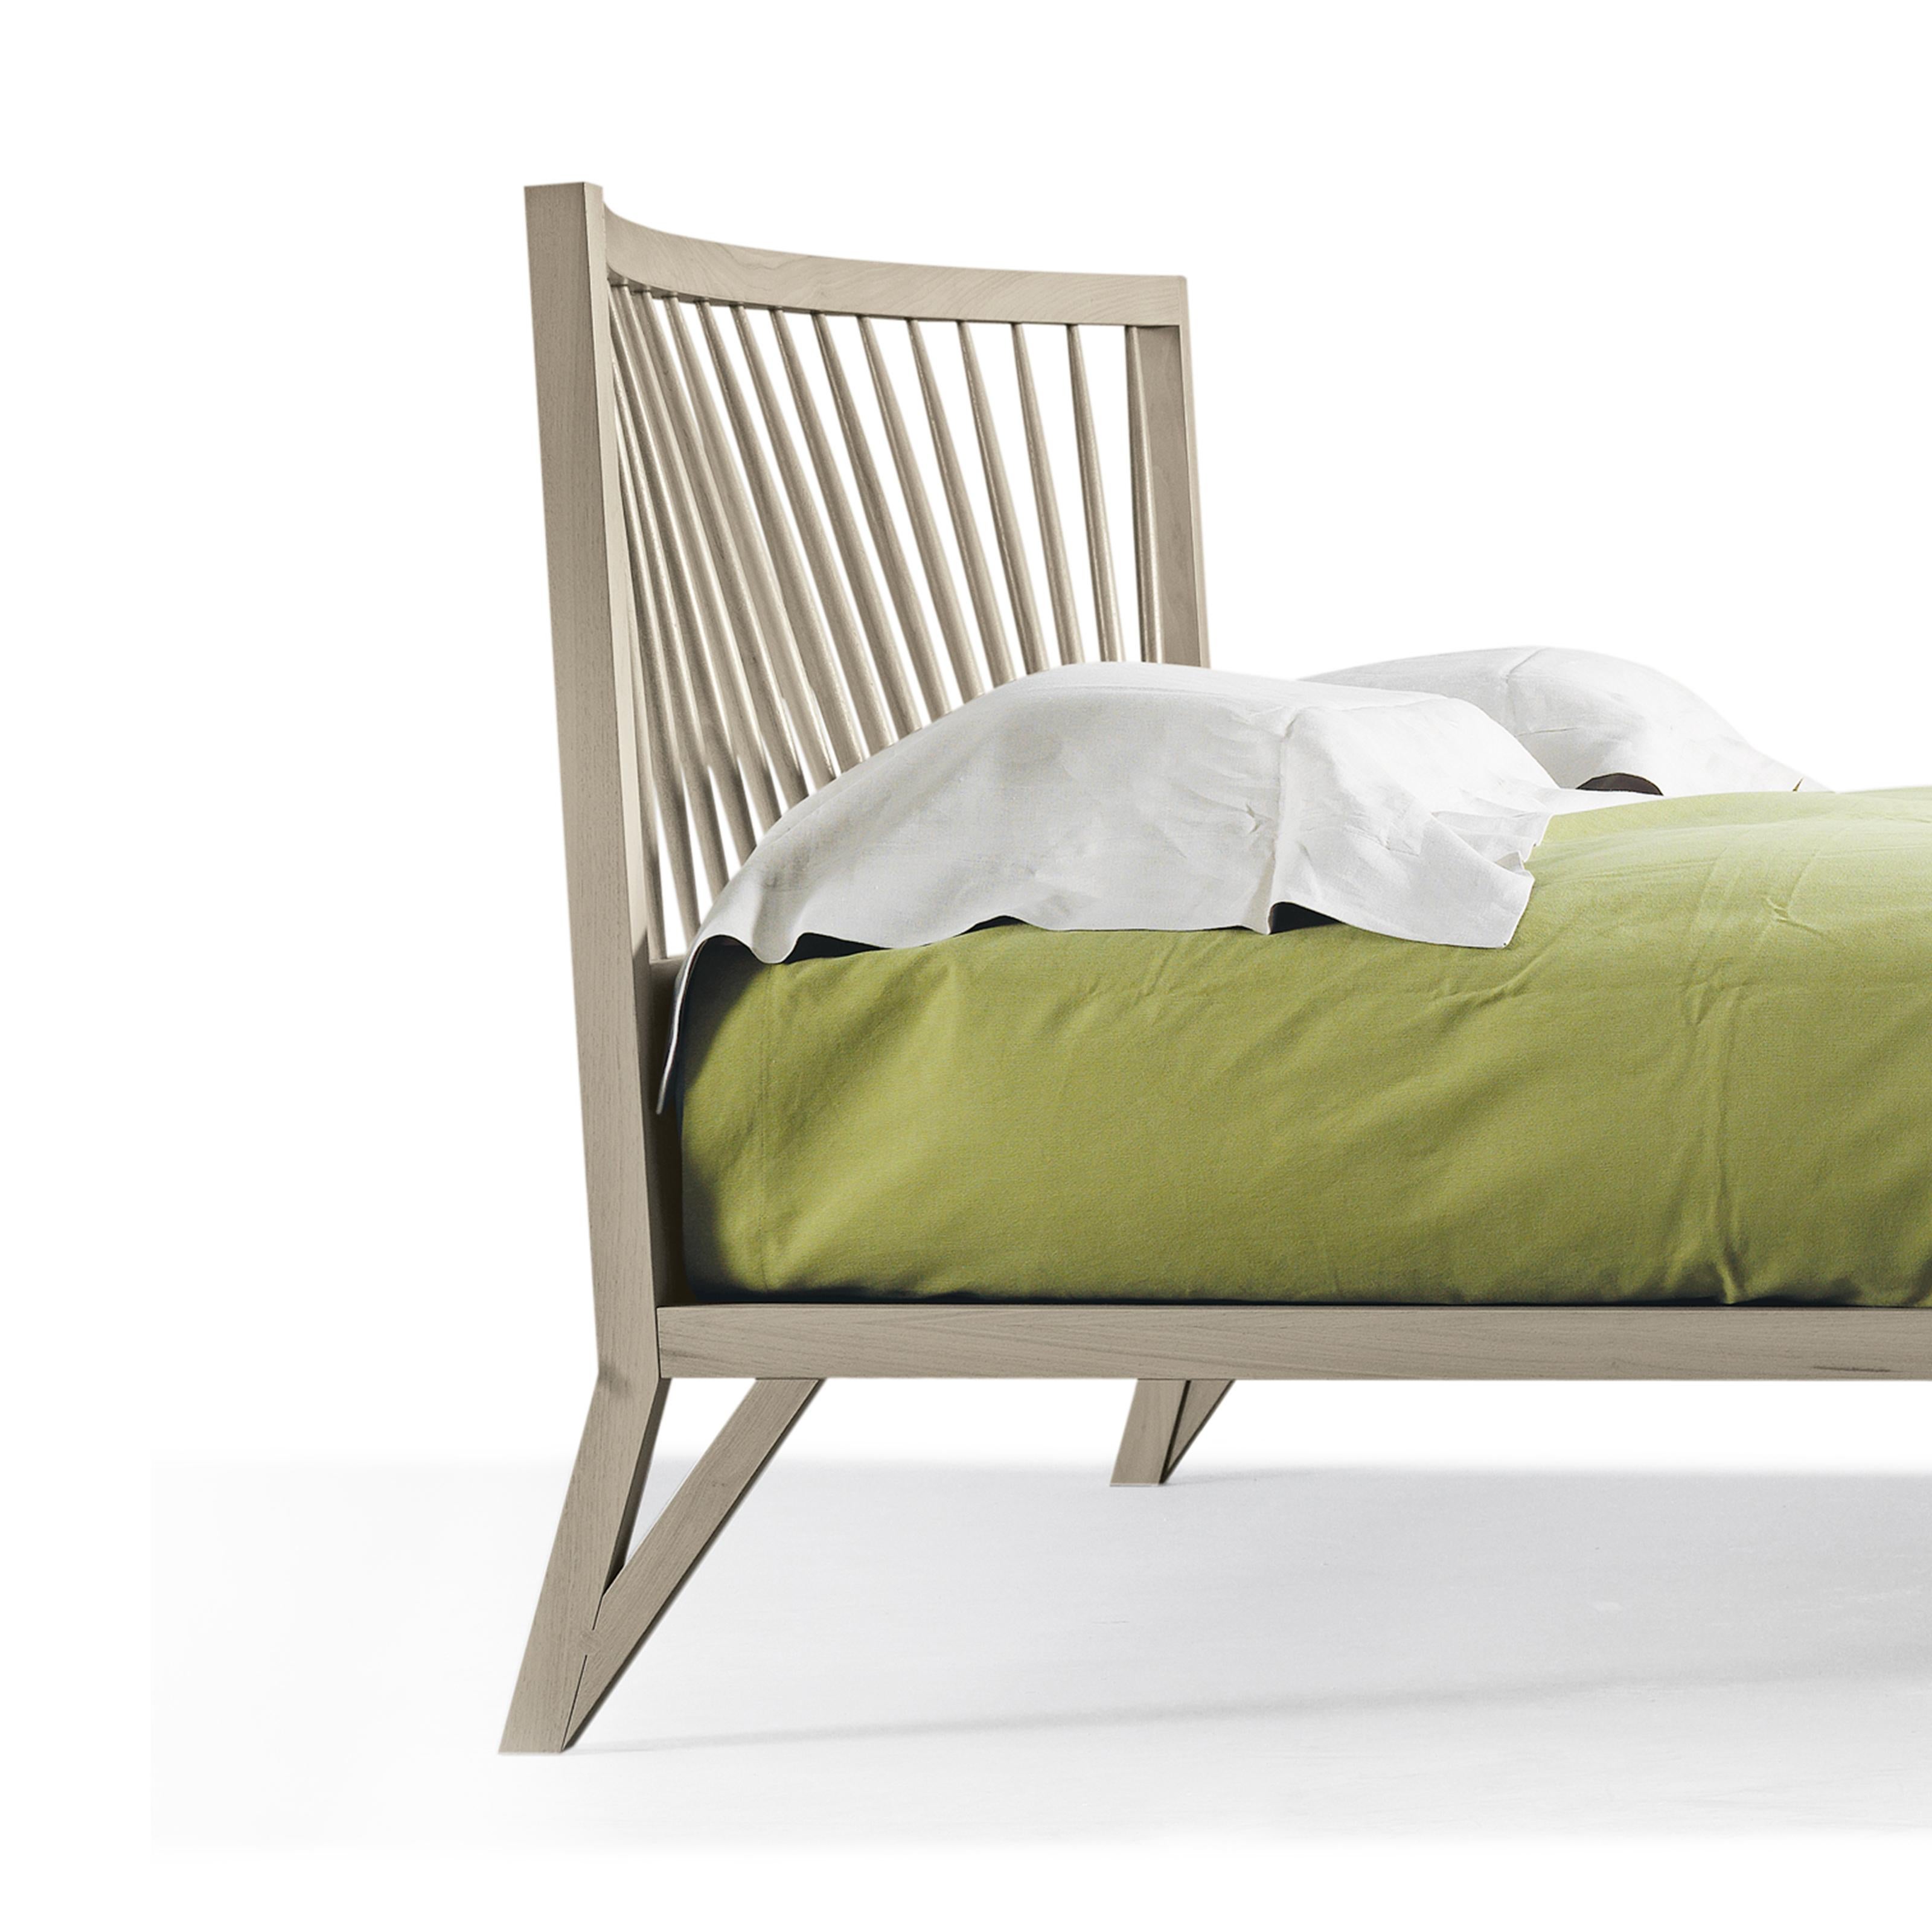 Oiled Leggiadro Solid Wood Bed, Walnut in Hand-Made Natural Grey Finish, Contemporary For Sale